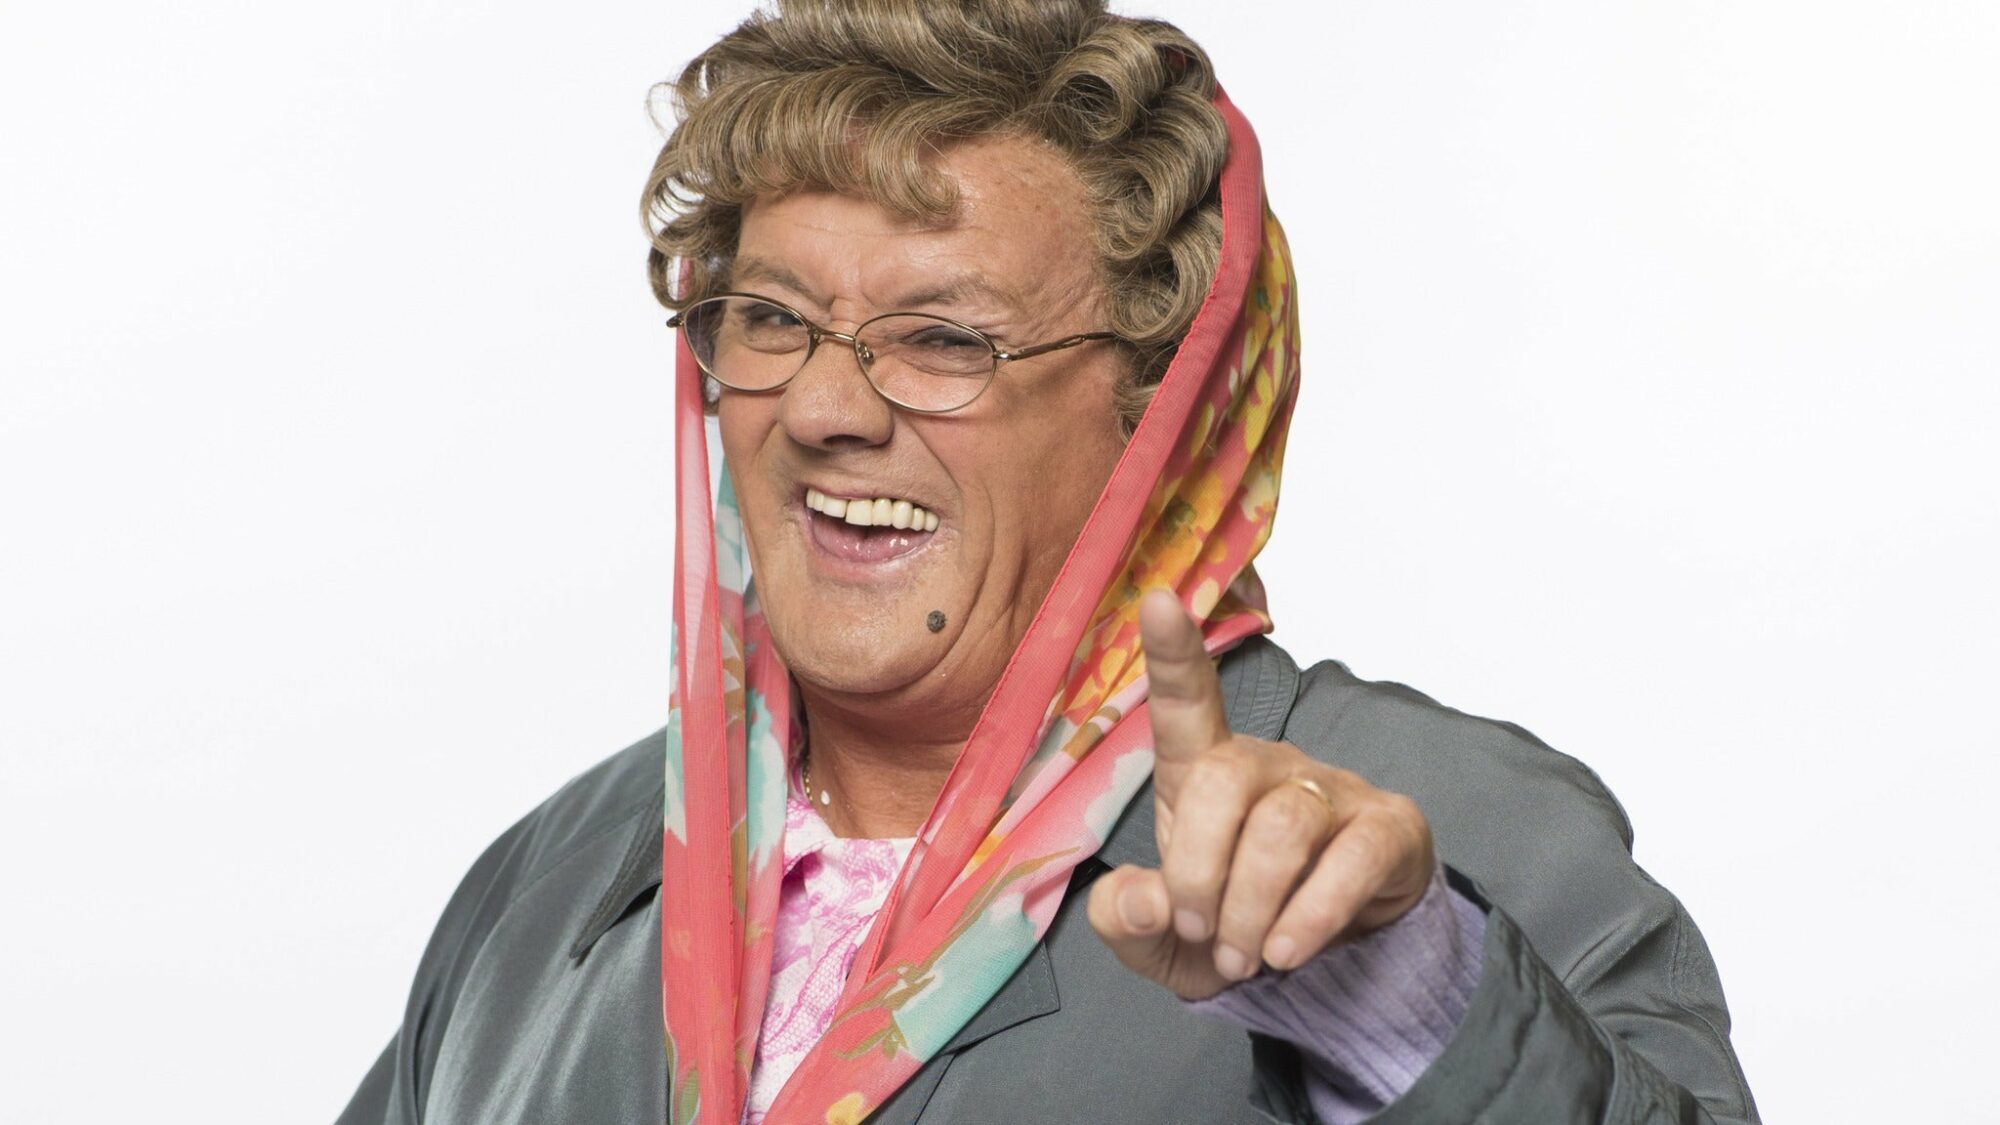 Image name Mrs Browns Boys Mrs Brown Rides Again at Bonus Arena Hull Hull the 10 image from the post Mrs Brown's Boys - Mrs Brown Rides Again at Connexin Live, Hull in Yorkshire.com.